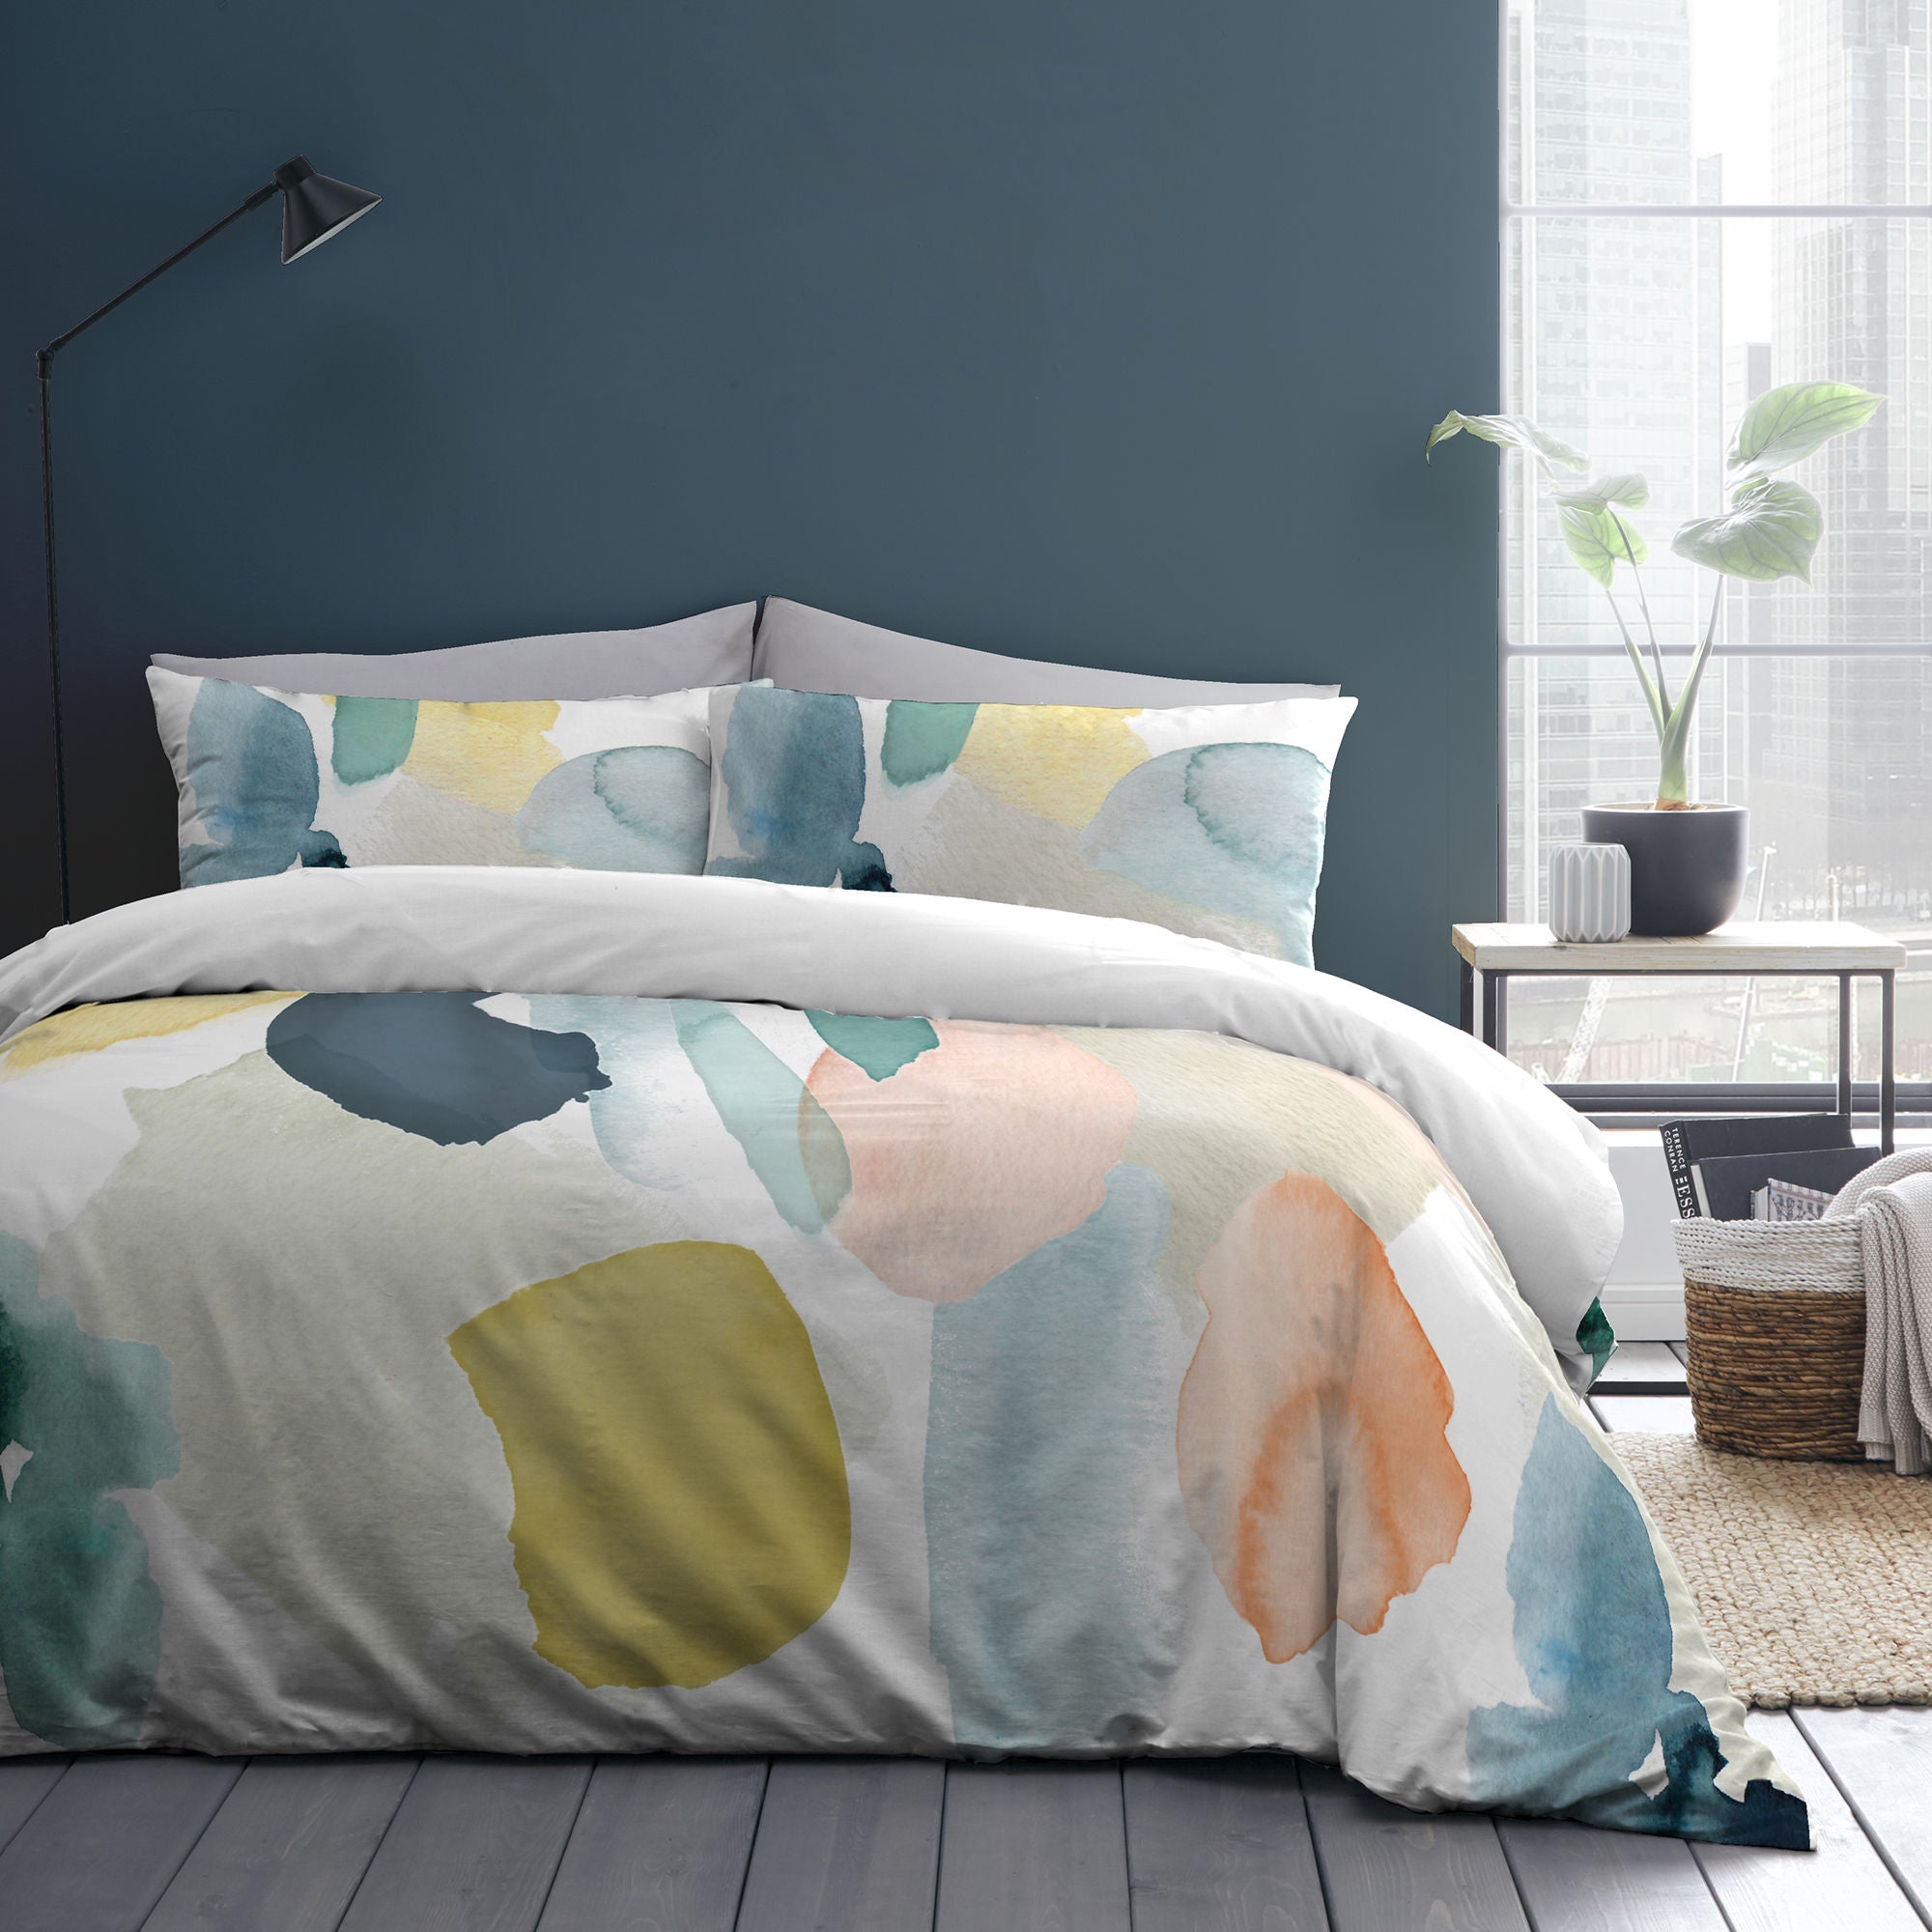 Solice Duvet Cover Set by Appletree Style in Multicolour - Duvet Cover Set - Appletree Style